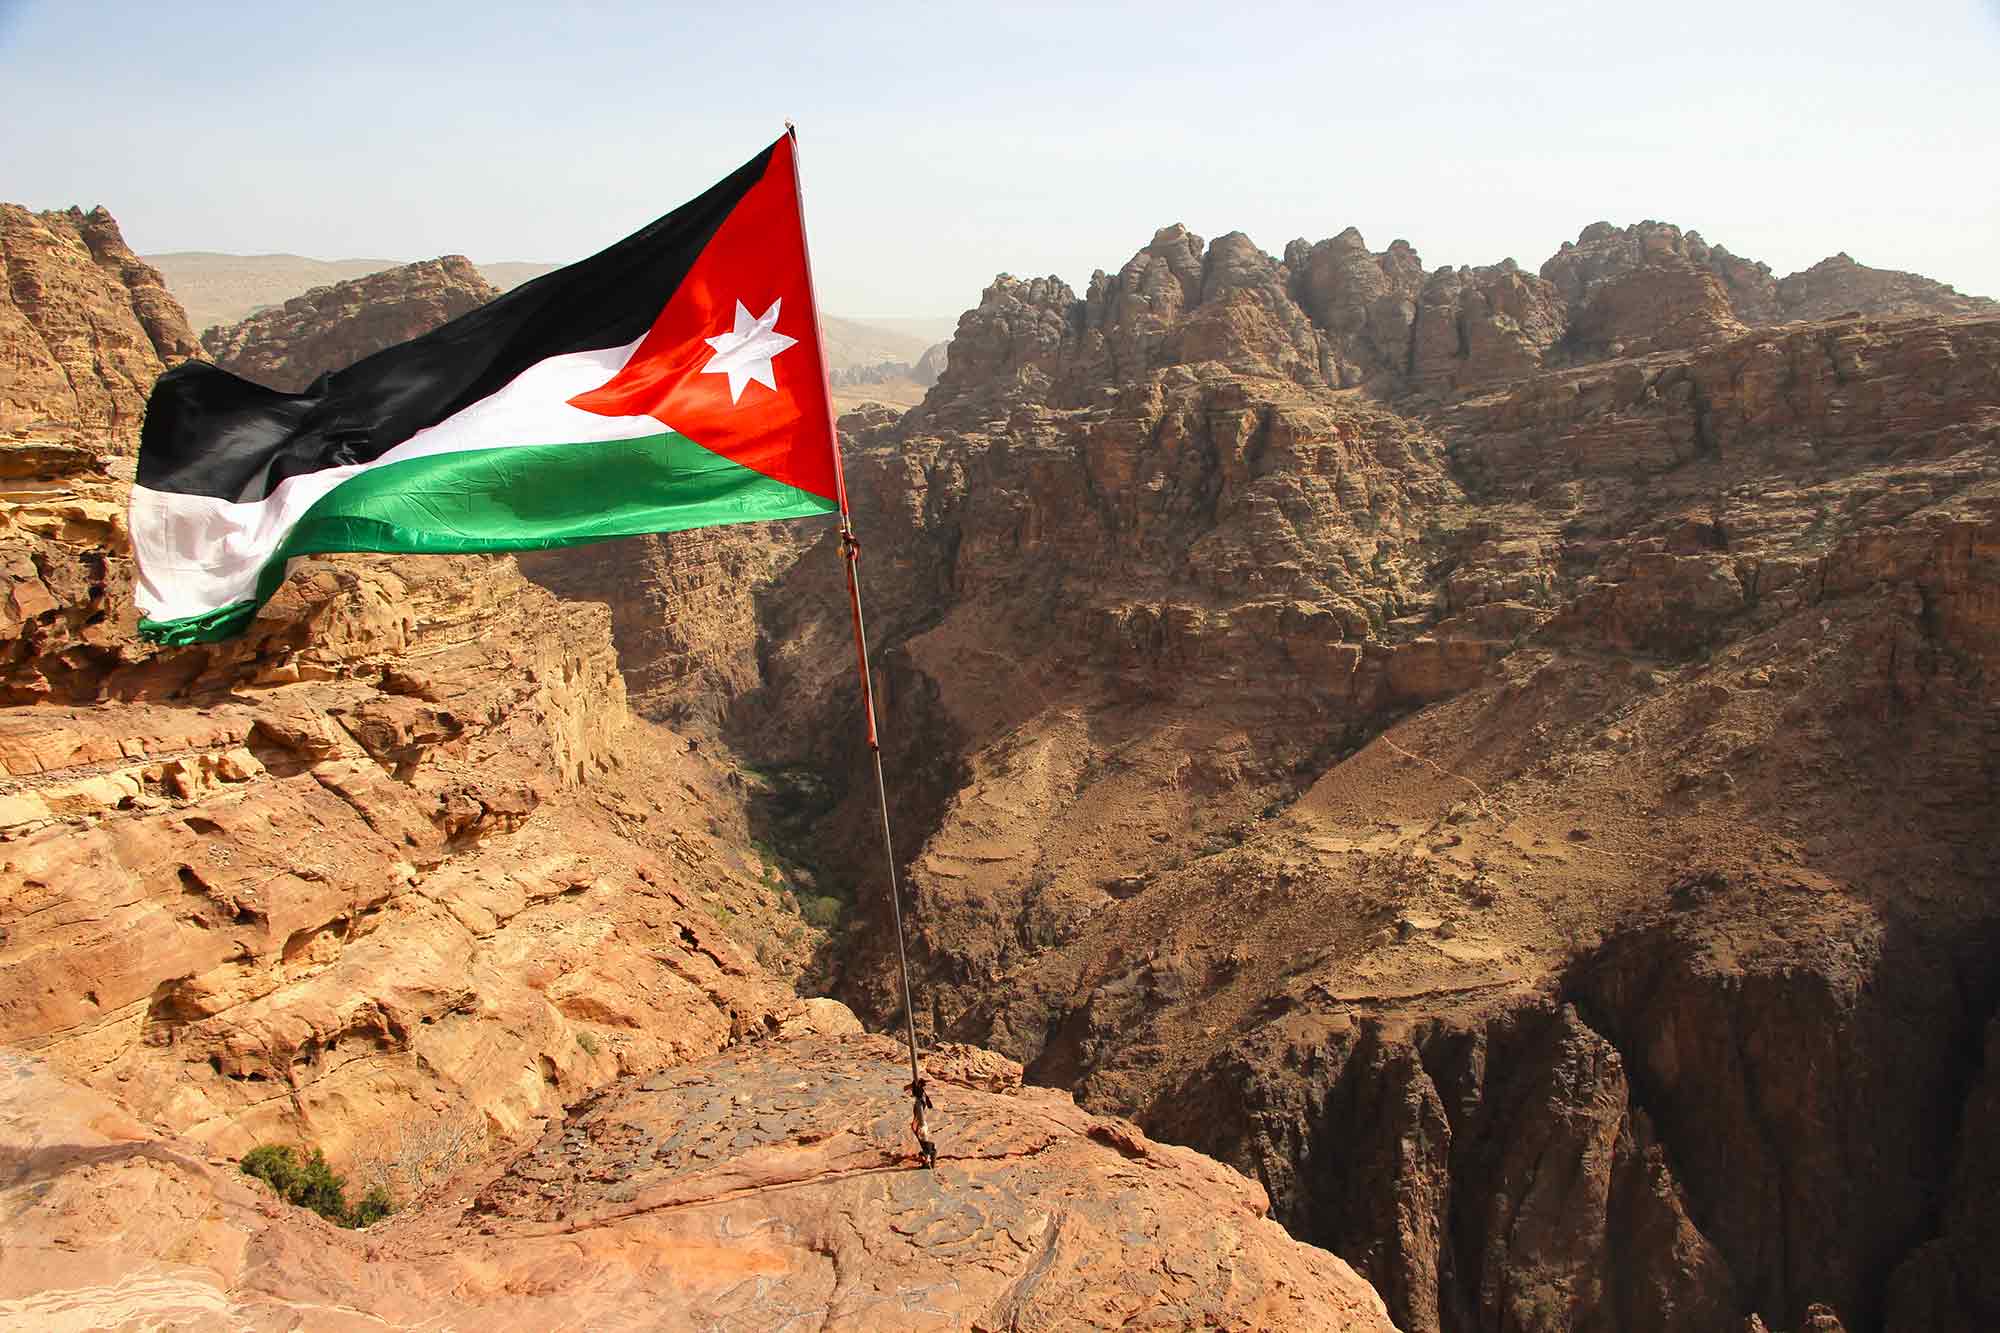 Viewpoint of the desert behind Petra, complete with the Jordan flag